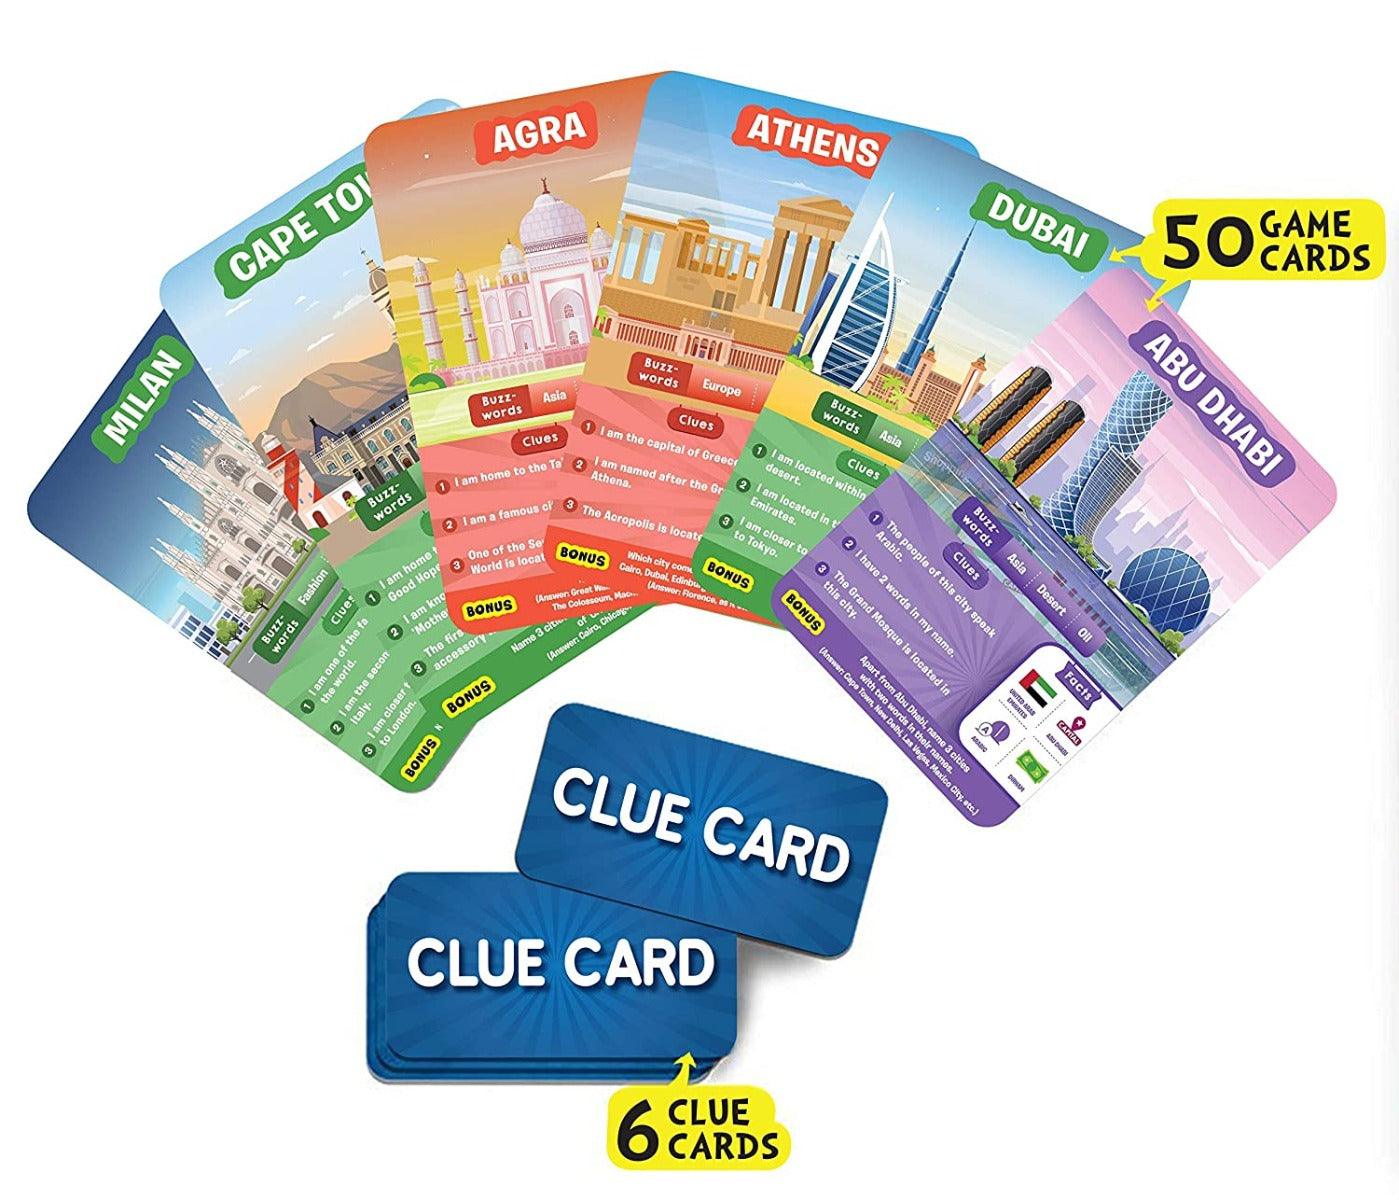 Skillmatics Educational Game : Cities Around the World - GUESS IN 10 (Ages 8-99)